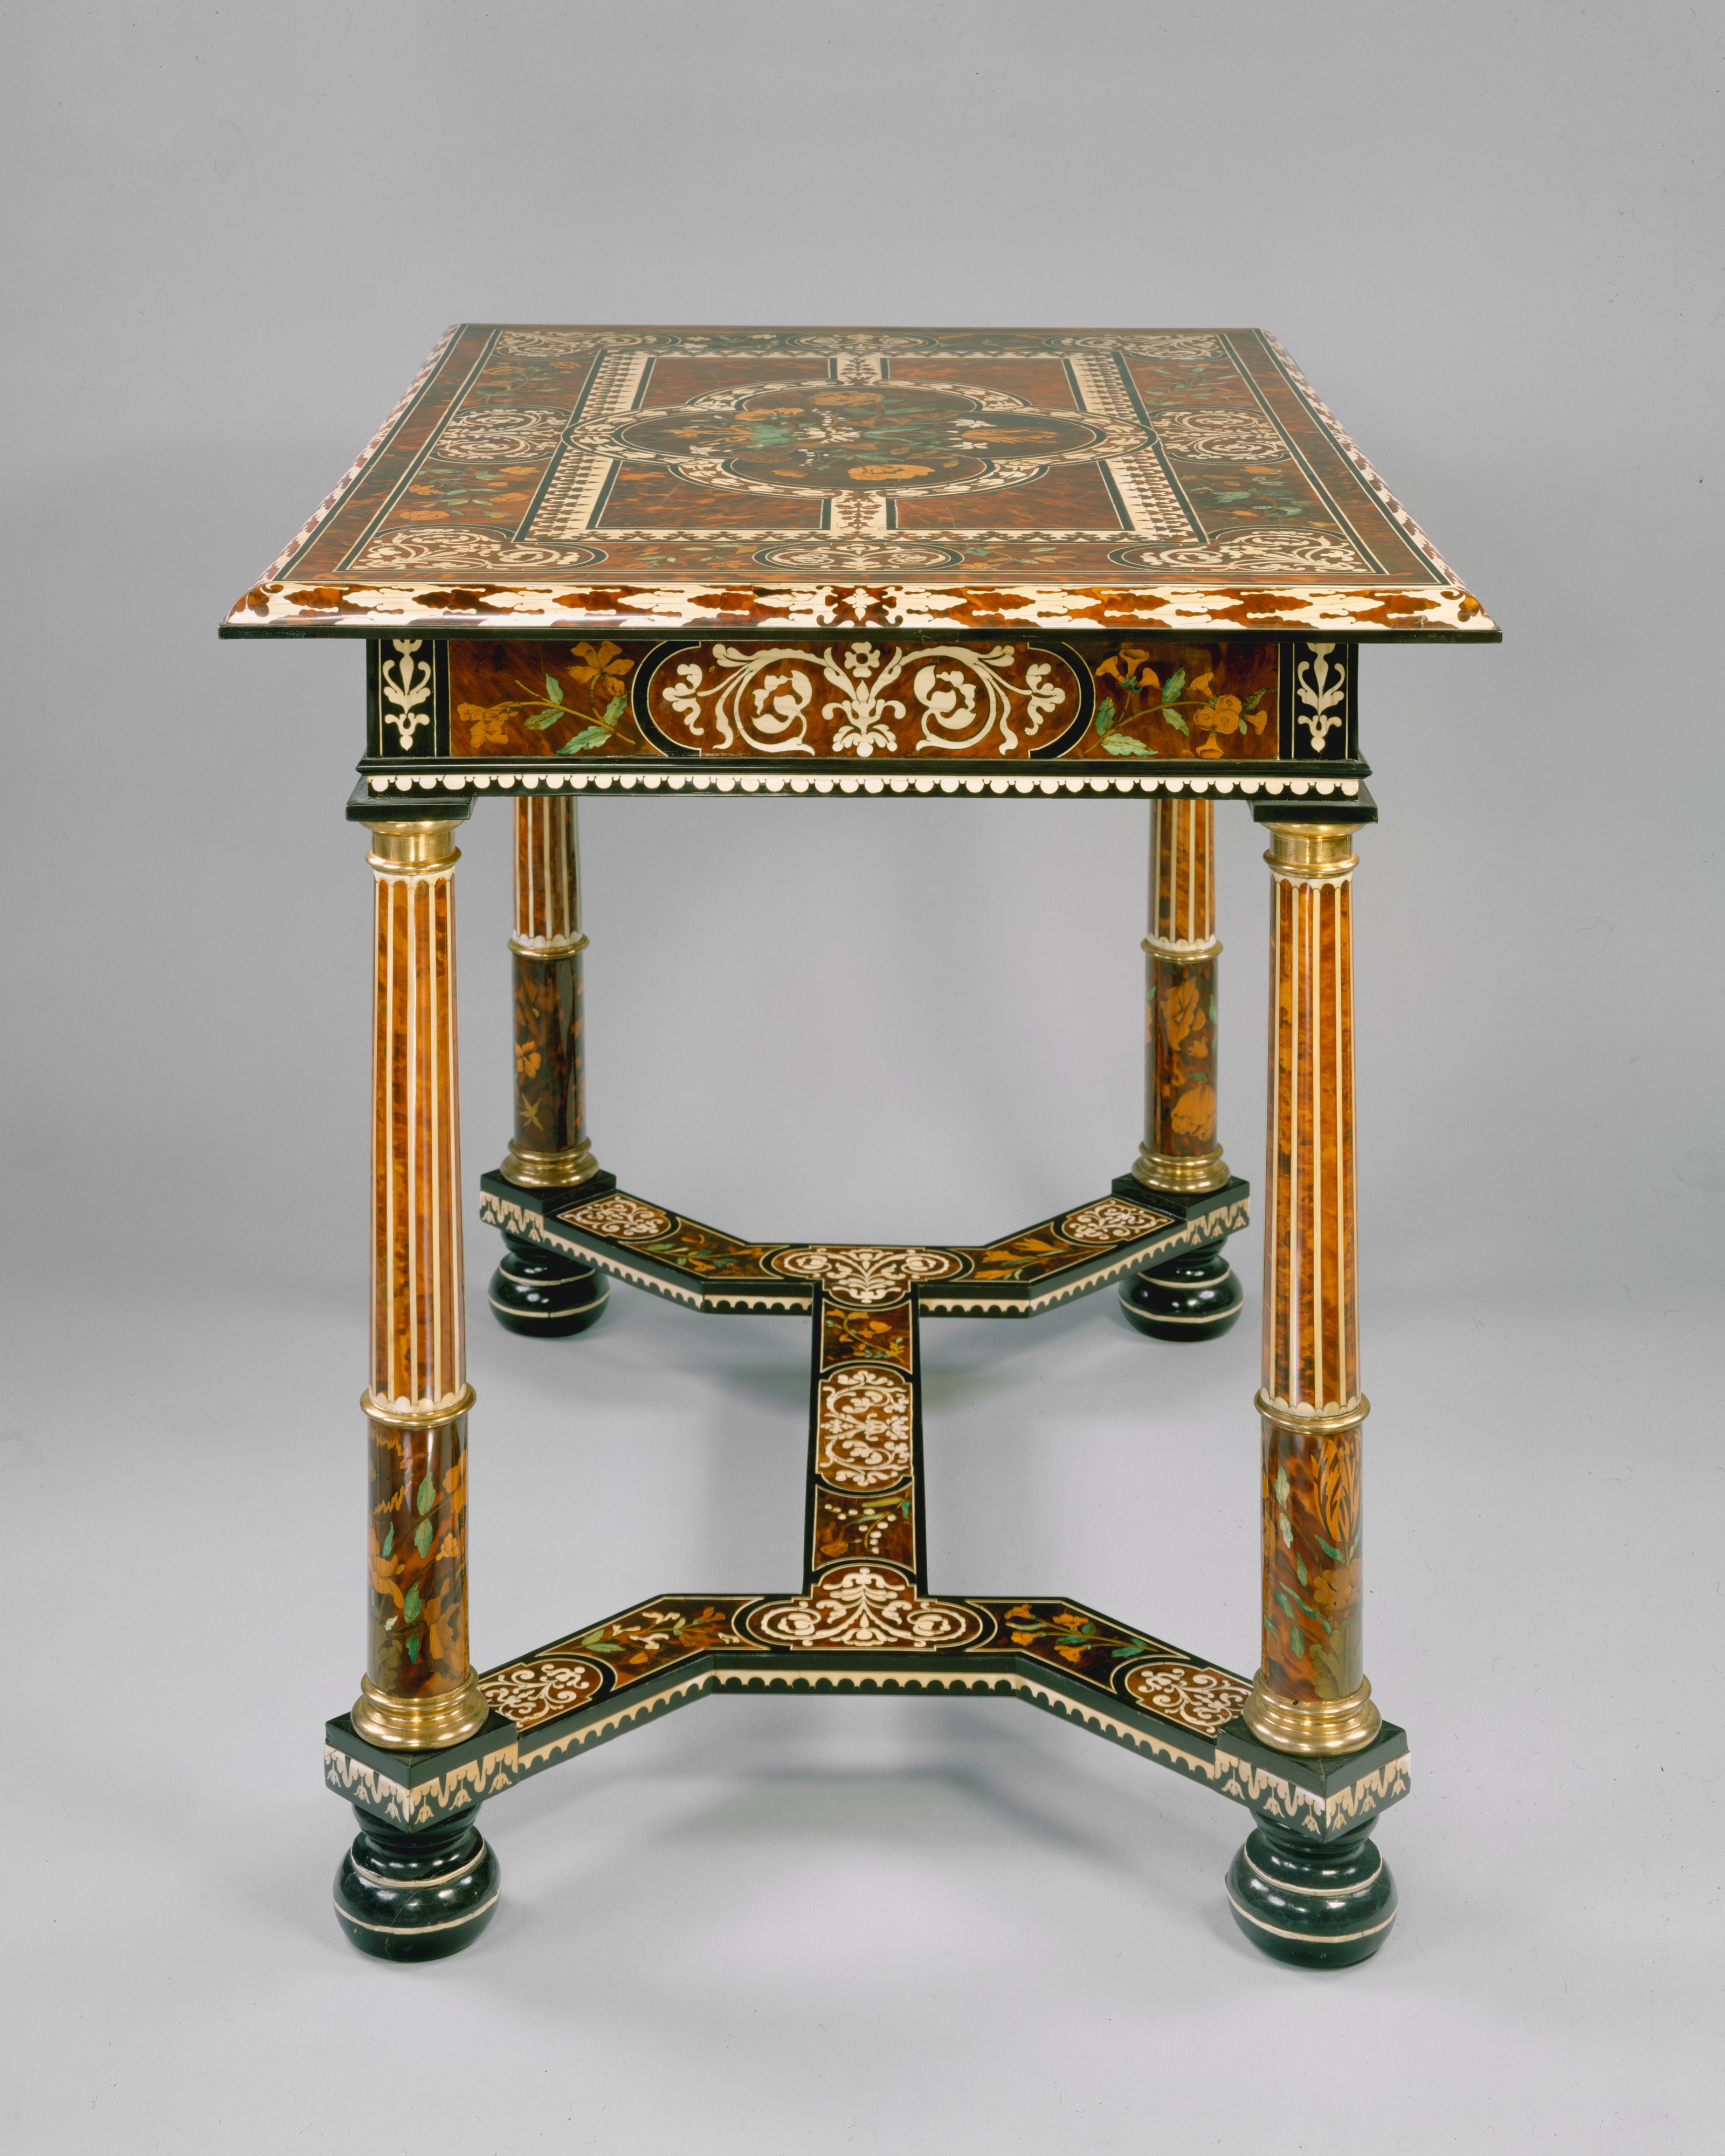 Attributed to Pierre of French, | Museum | Paris | Gole Table Art Metropolitan The